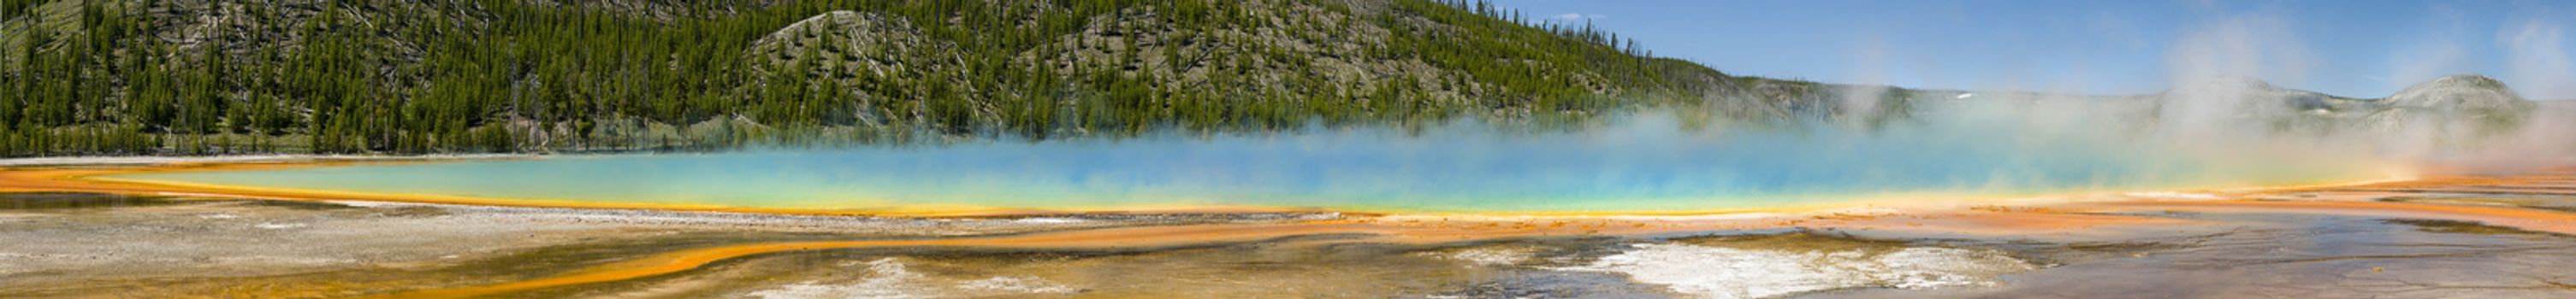 Grand Prismatic Spring panorama in Midway Geyser Basin, Yellowstone National Park, Wyoming